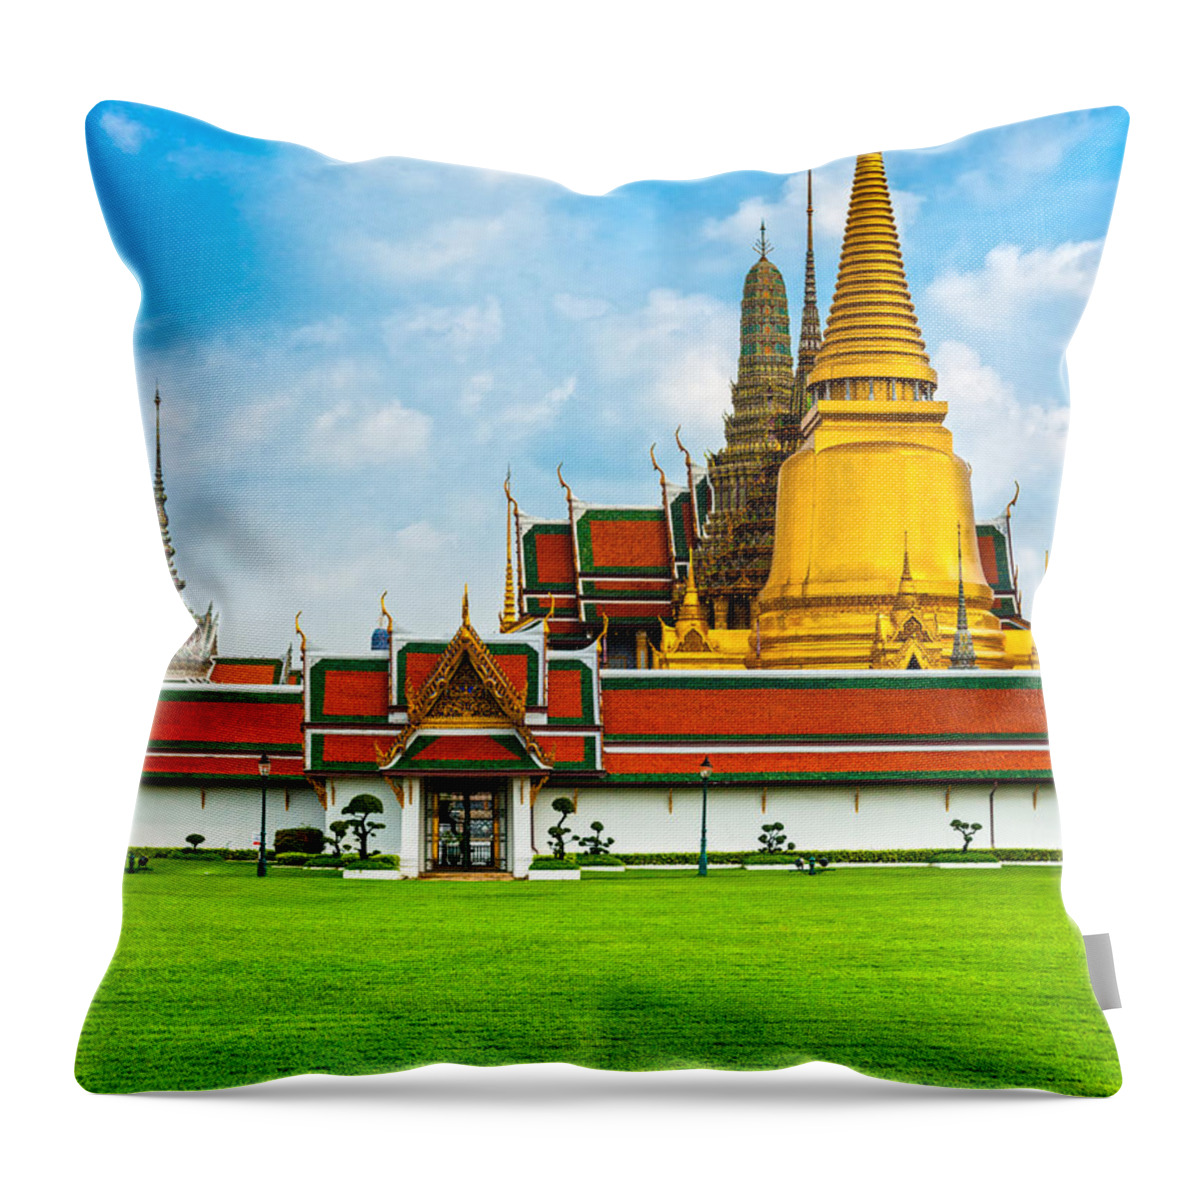 Architecture Throw Pillow featuring the photograph Wat Phra Kaew - Bangkok by Luciano Mortula